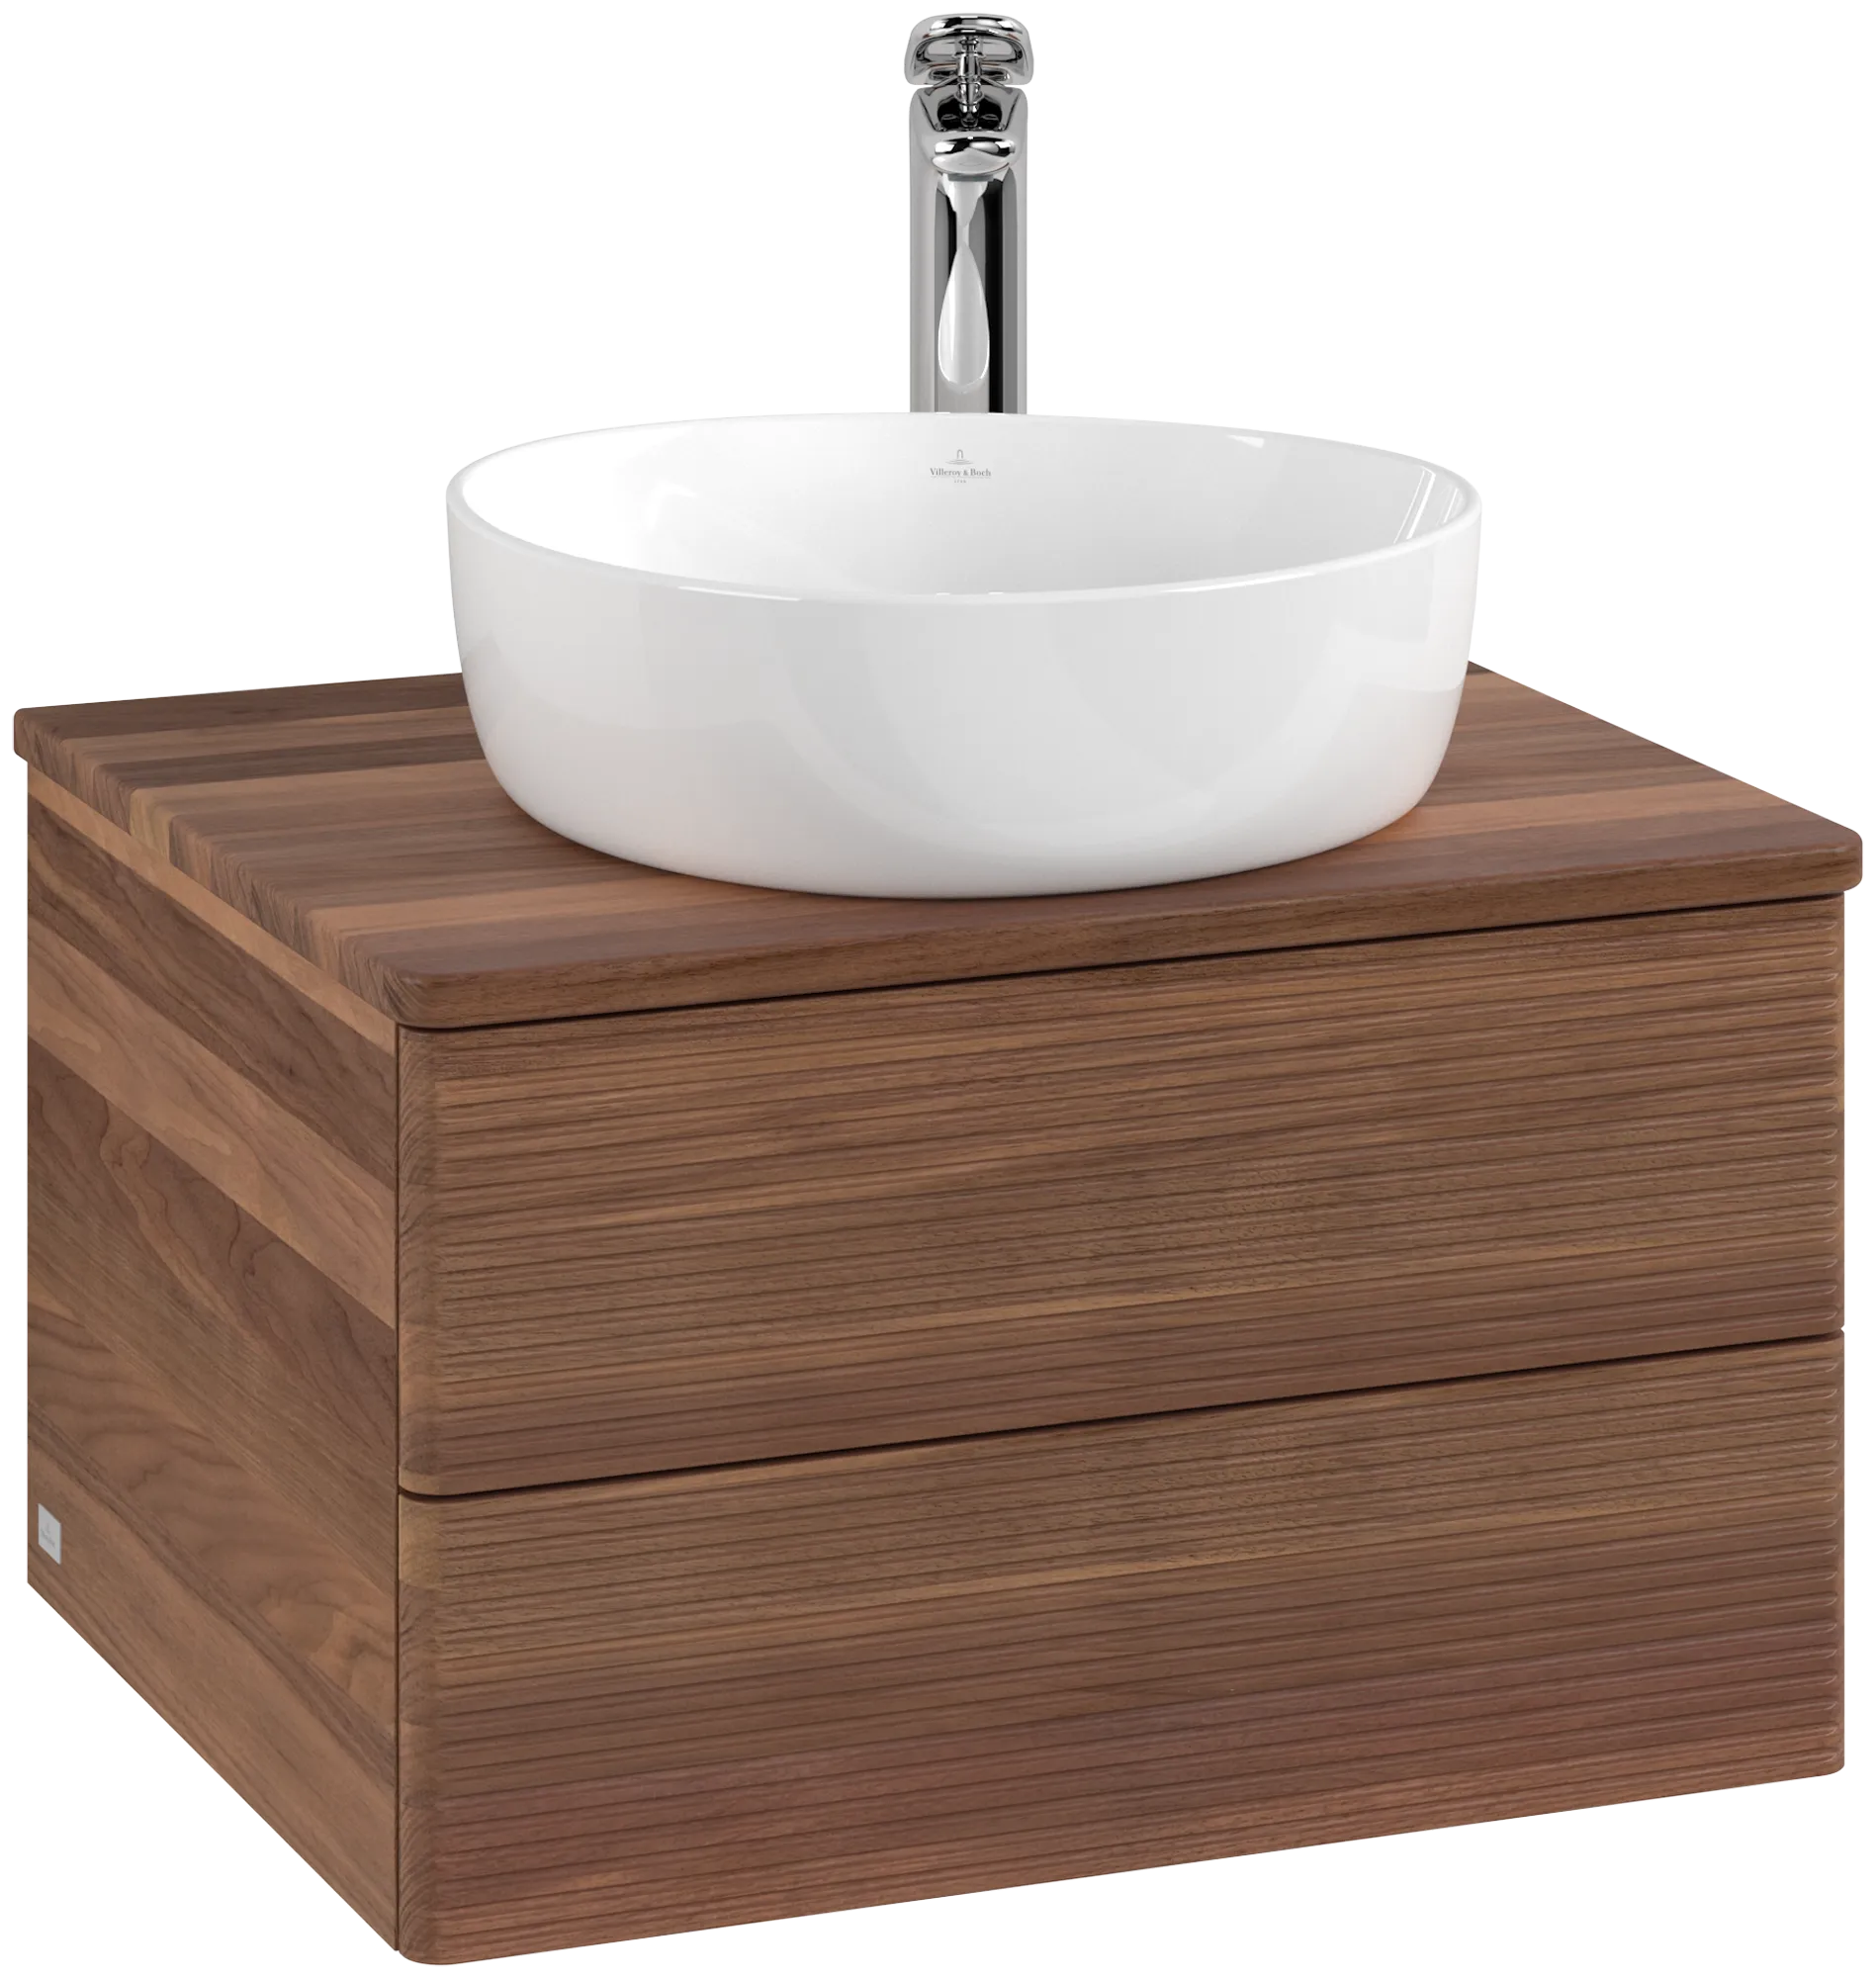 Picture of VILLEROY BOCH Antao Vanity unit, with lighting, 2 pull-out compartments, 600 x 360 x 500 mm, Front with grain texture, Warm Walnut / Warm Walnut #L18152HM